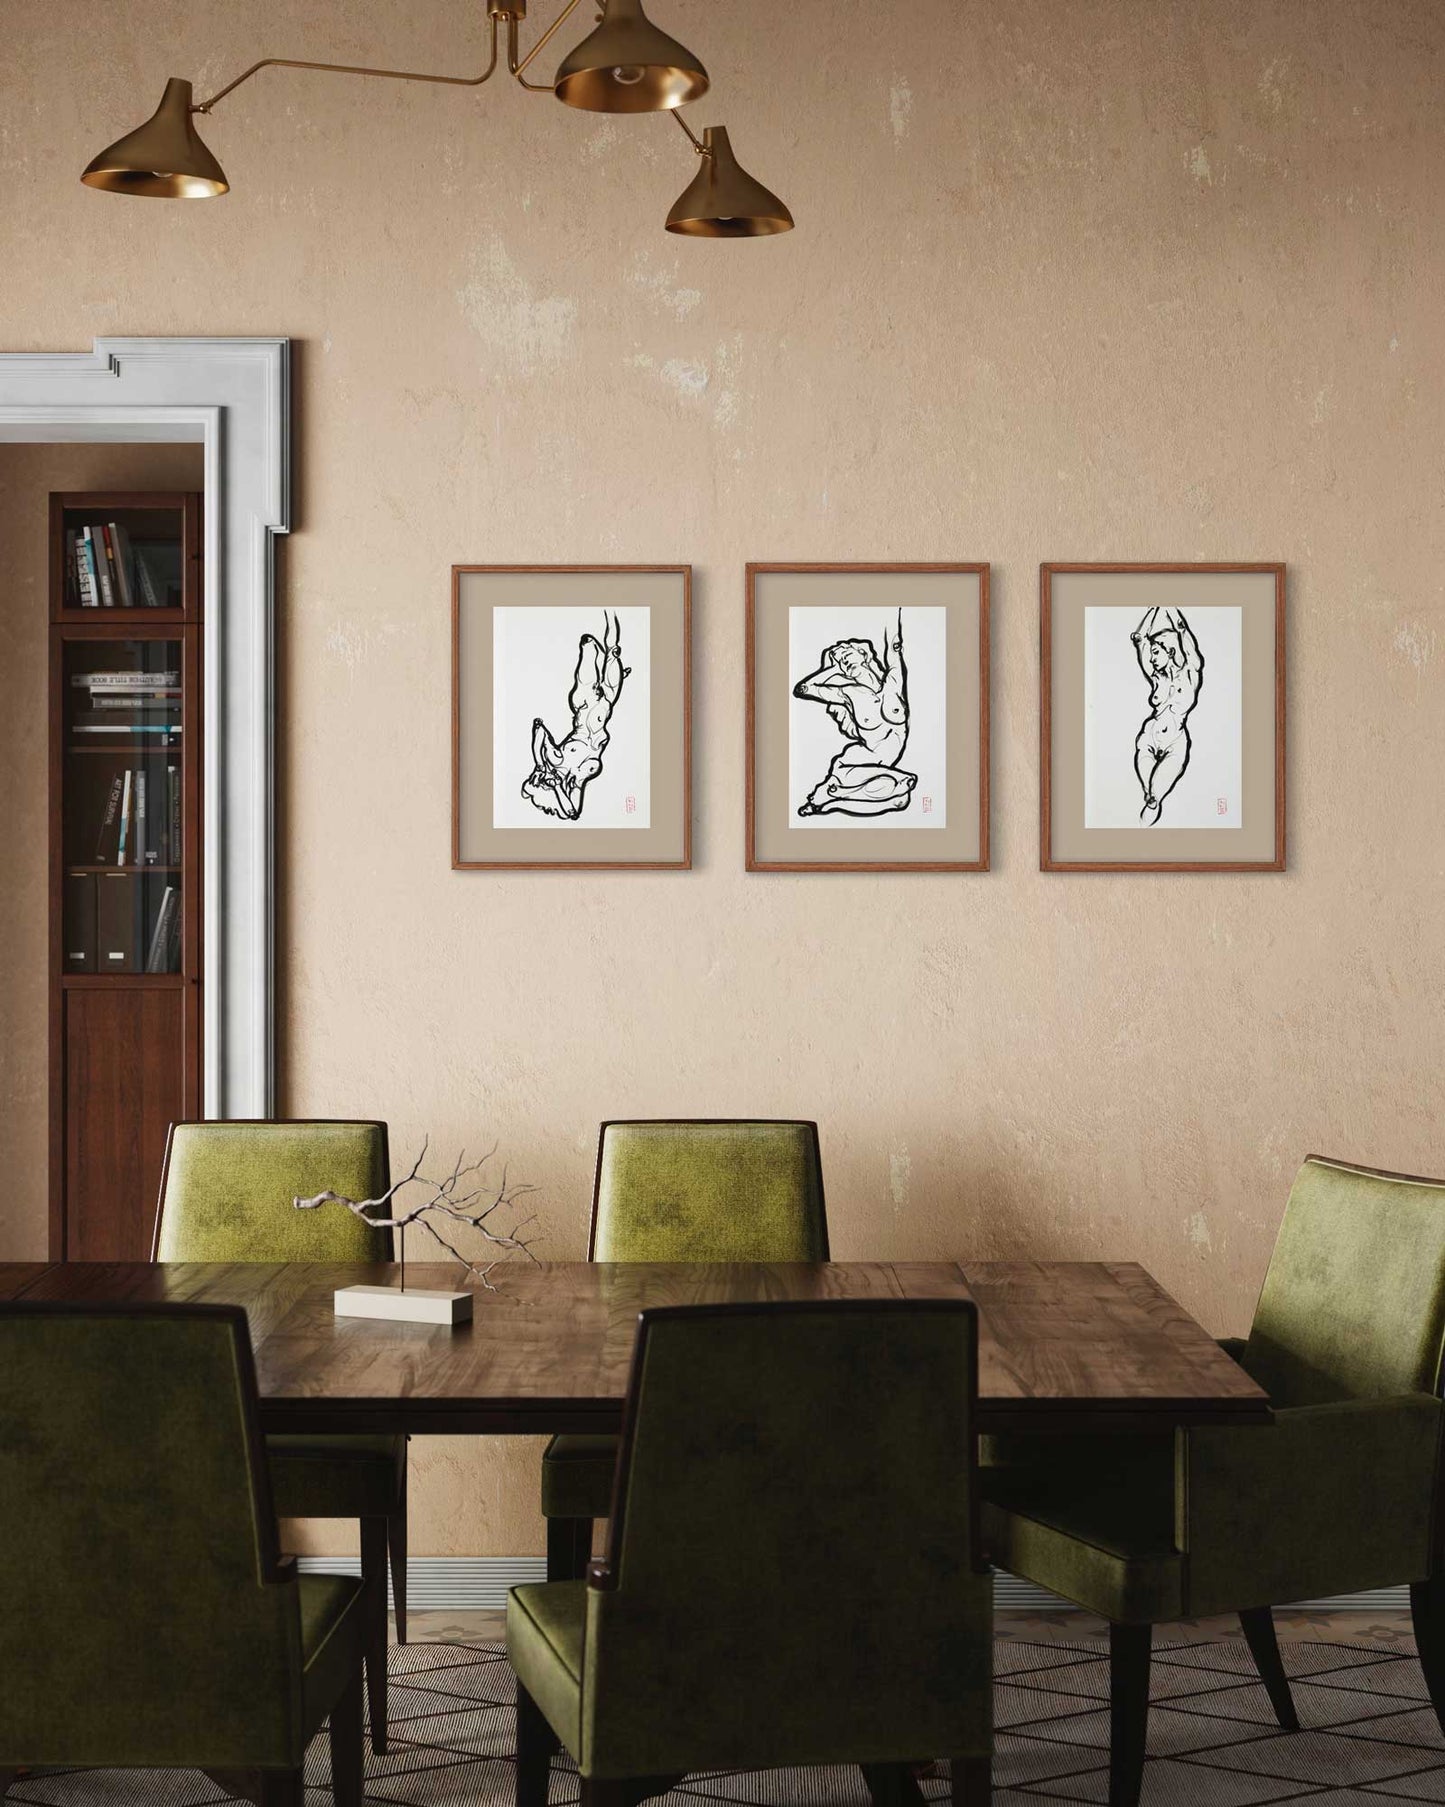 Fragmented Selves: A Triptych in Lines. Original figurative drawing - contemporary guest room